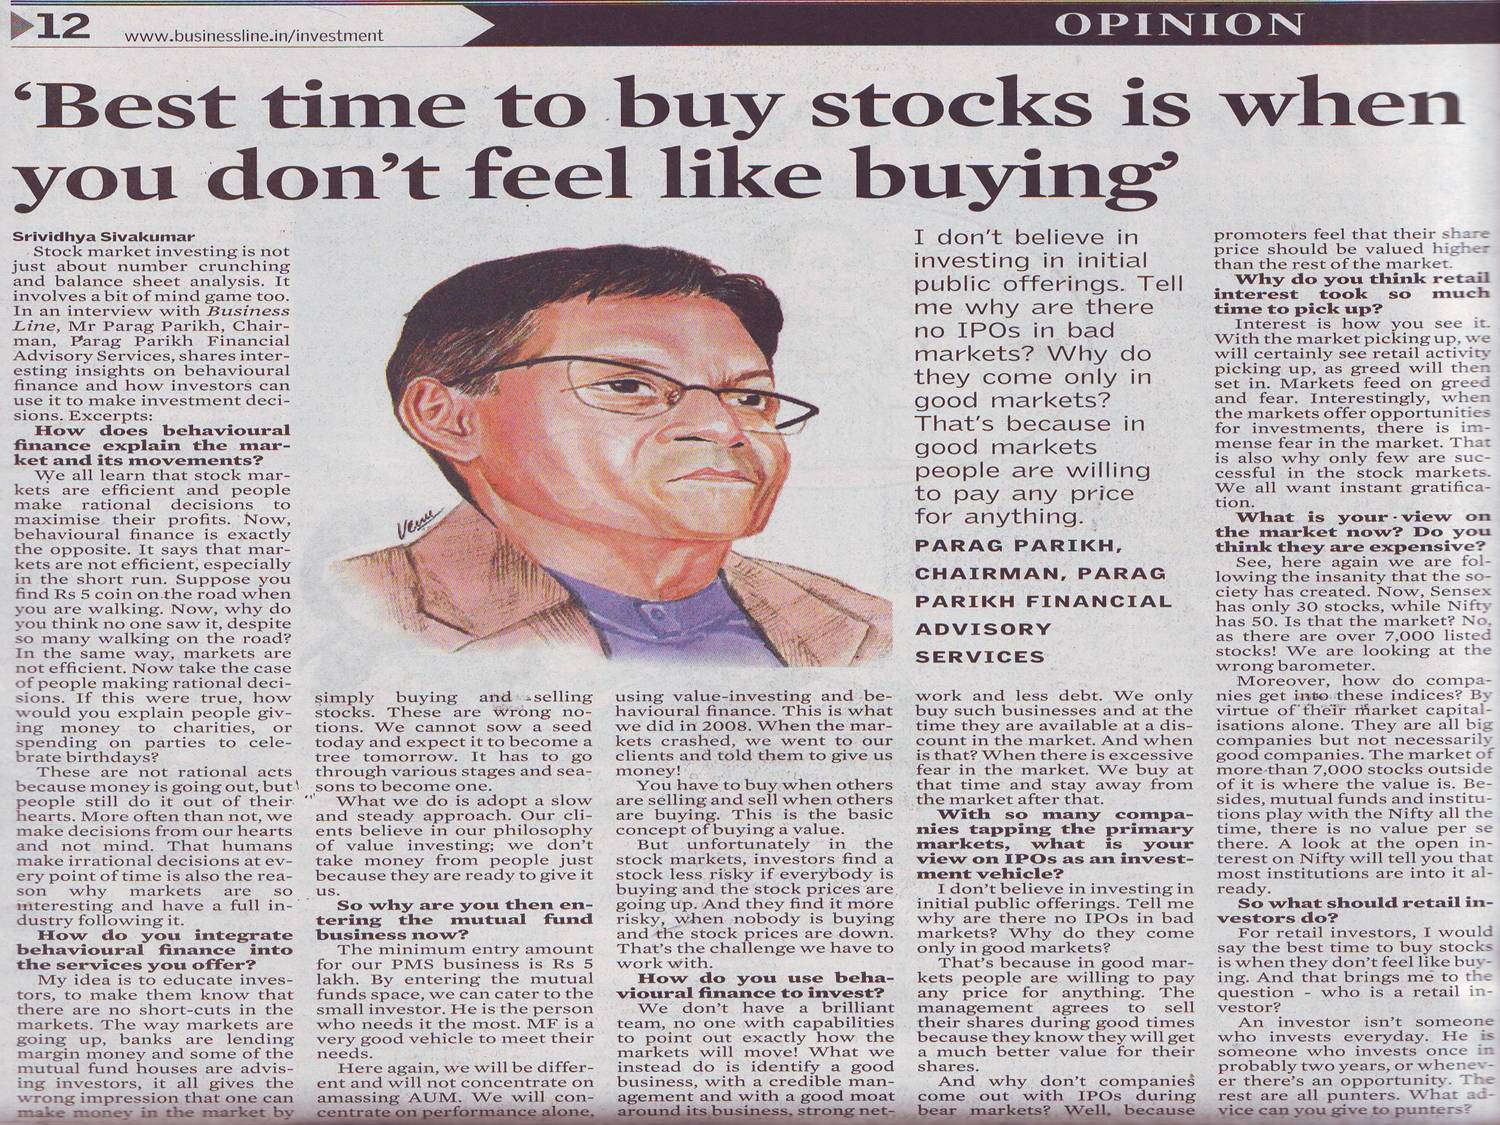 Best time to buy stocks is when you don't feel like buying: Parag Parikh